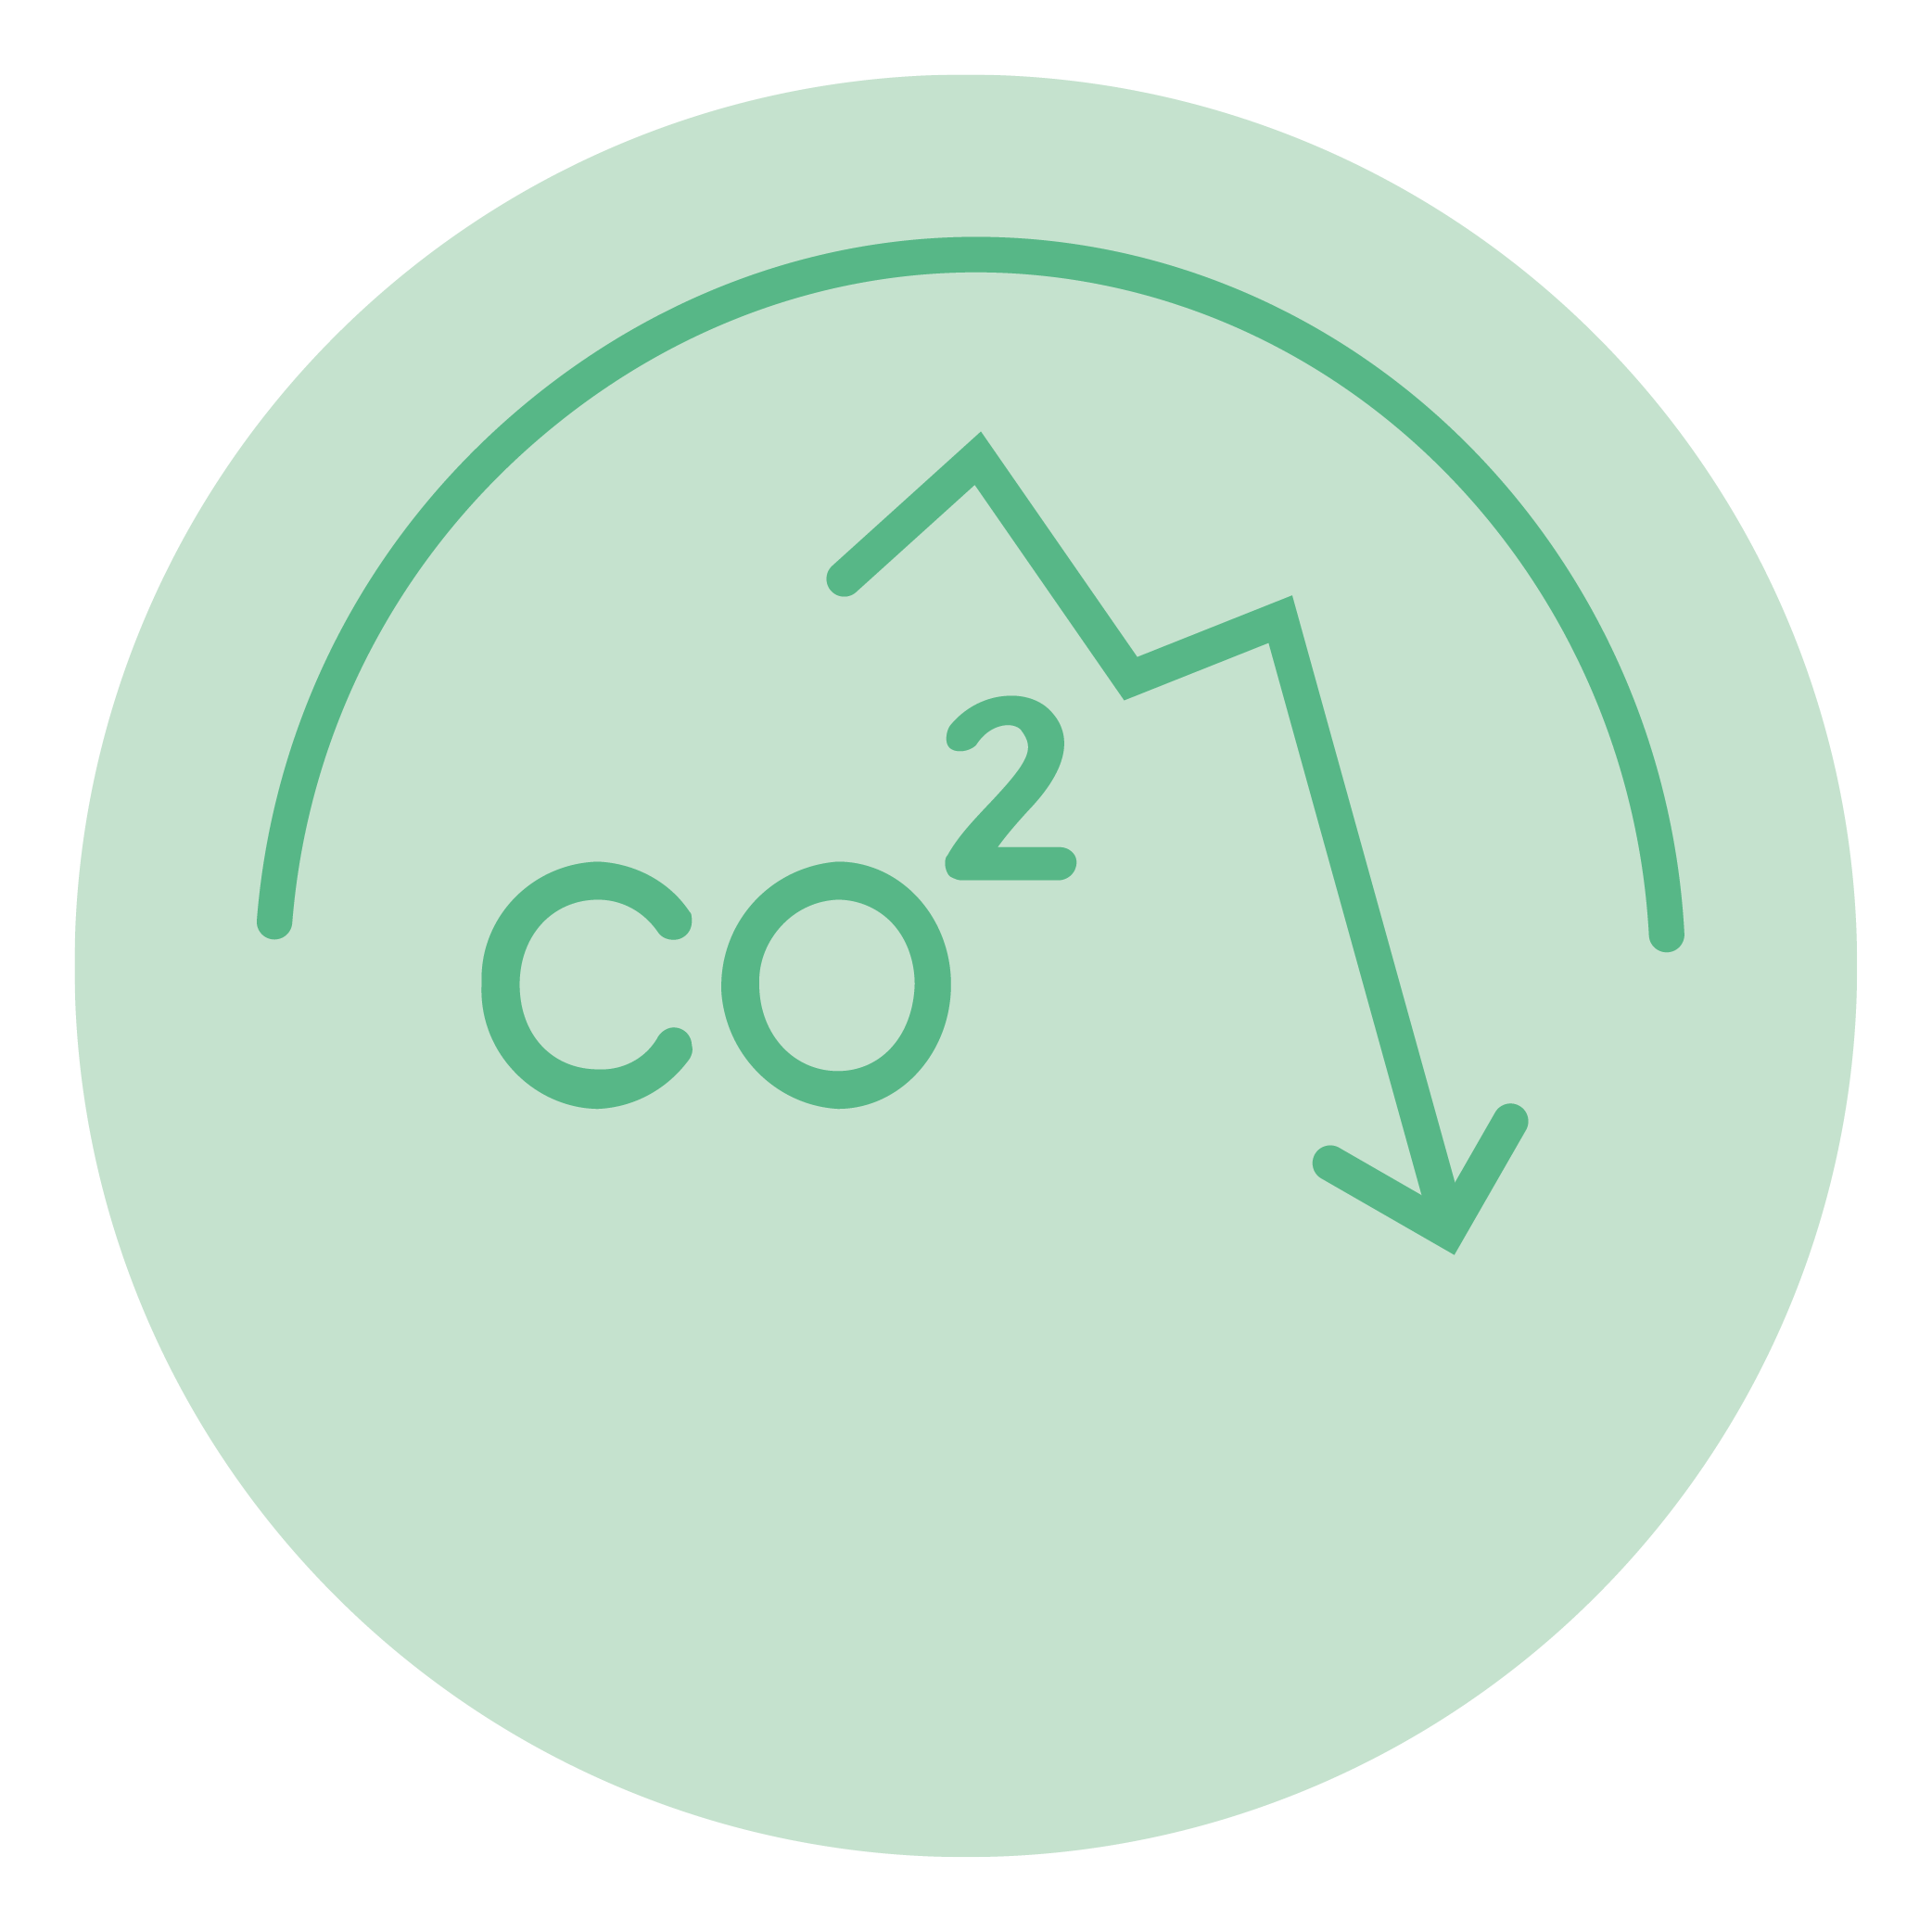 Illustrative icon of reduced co2